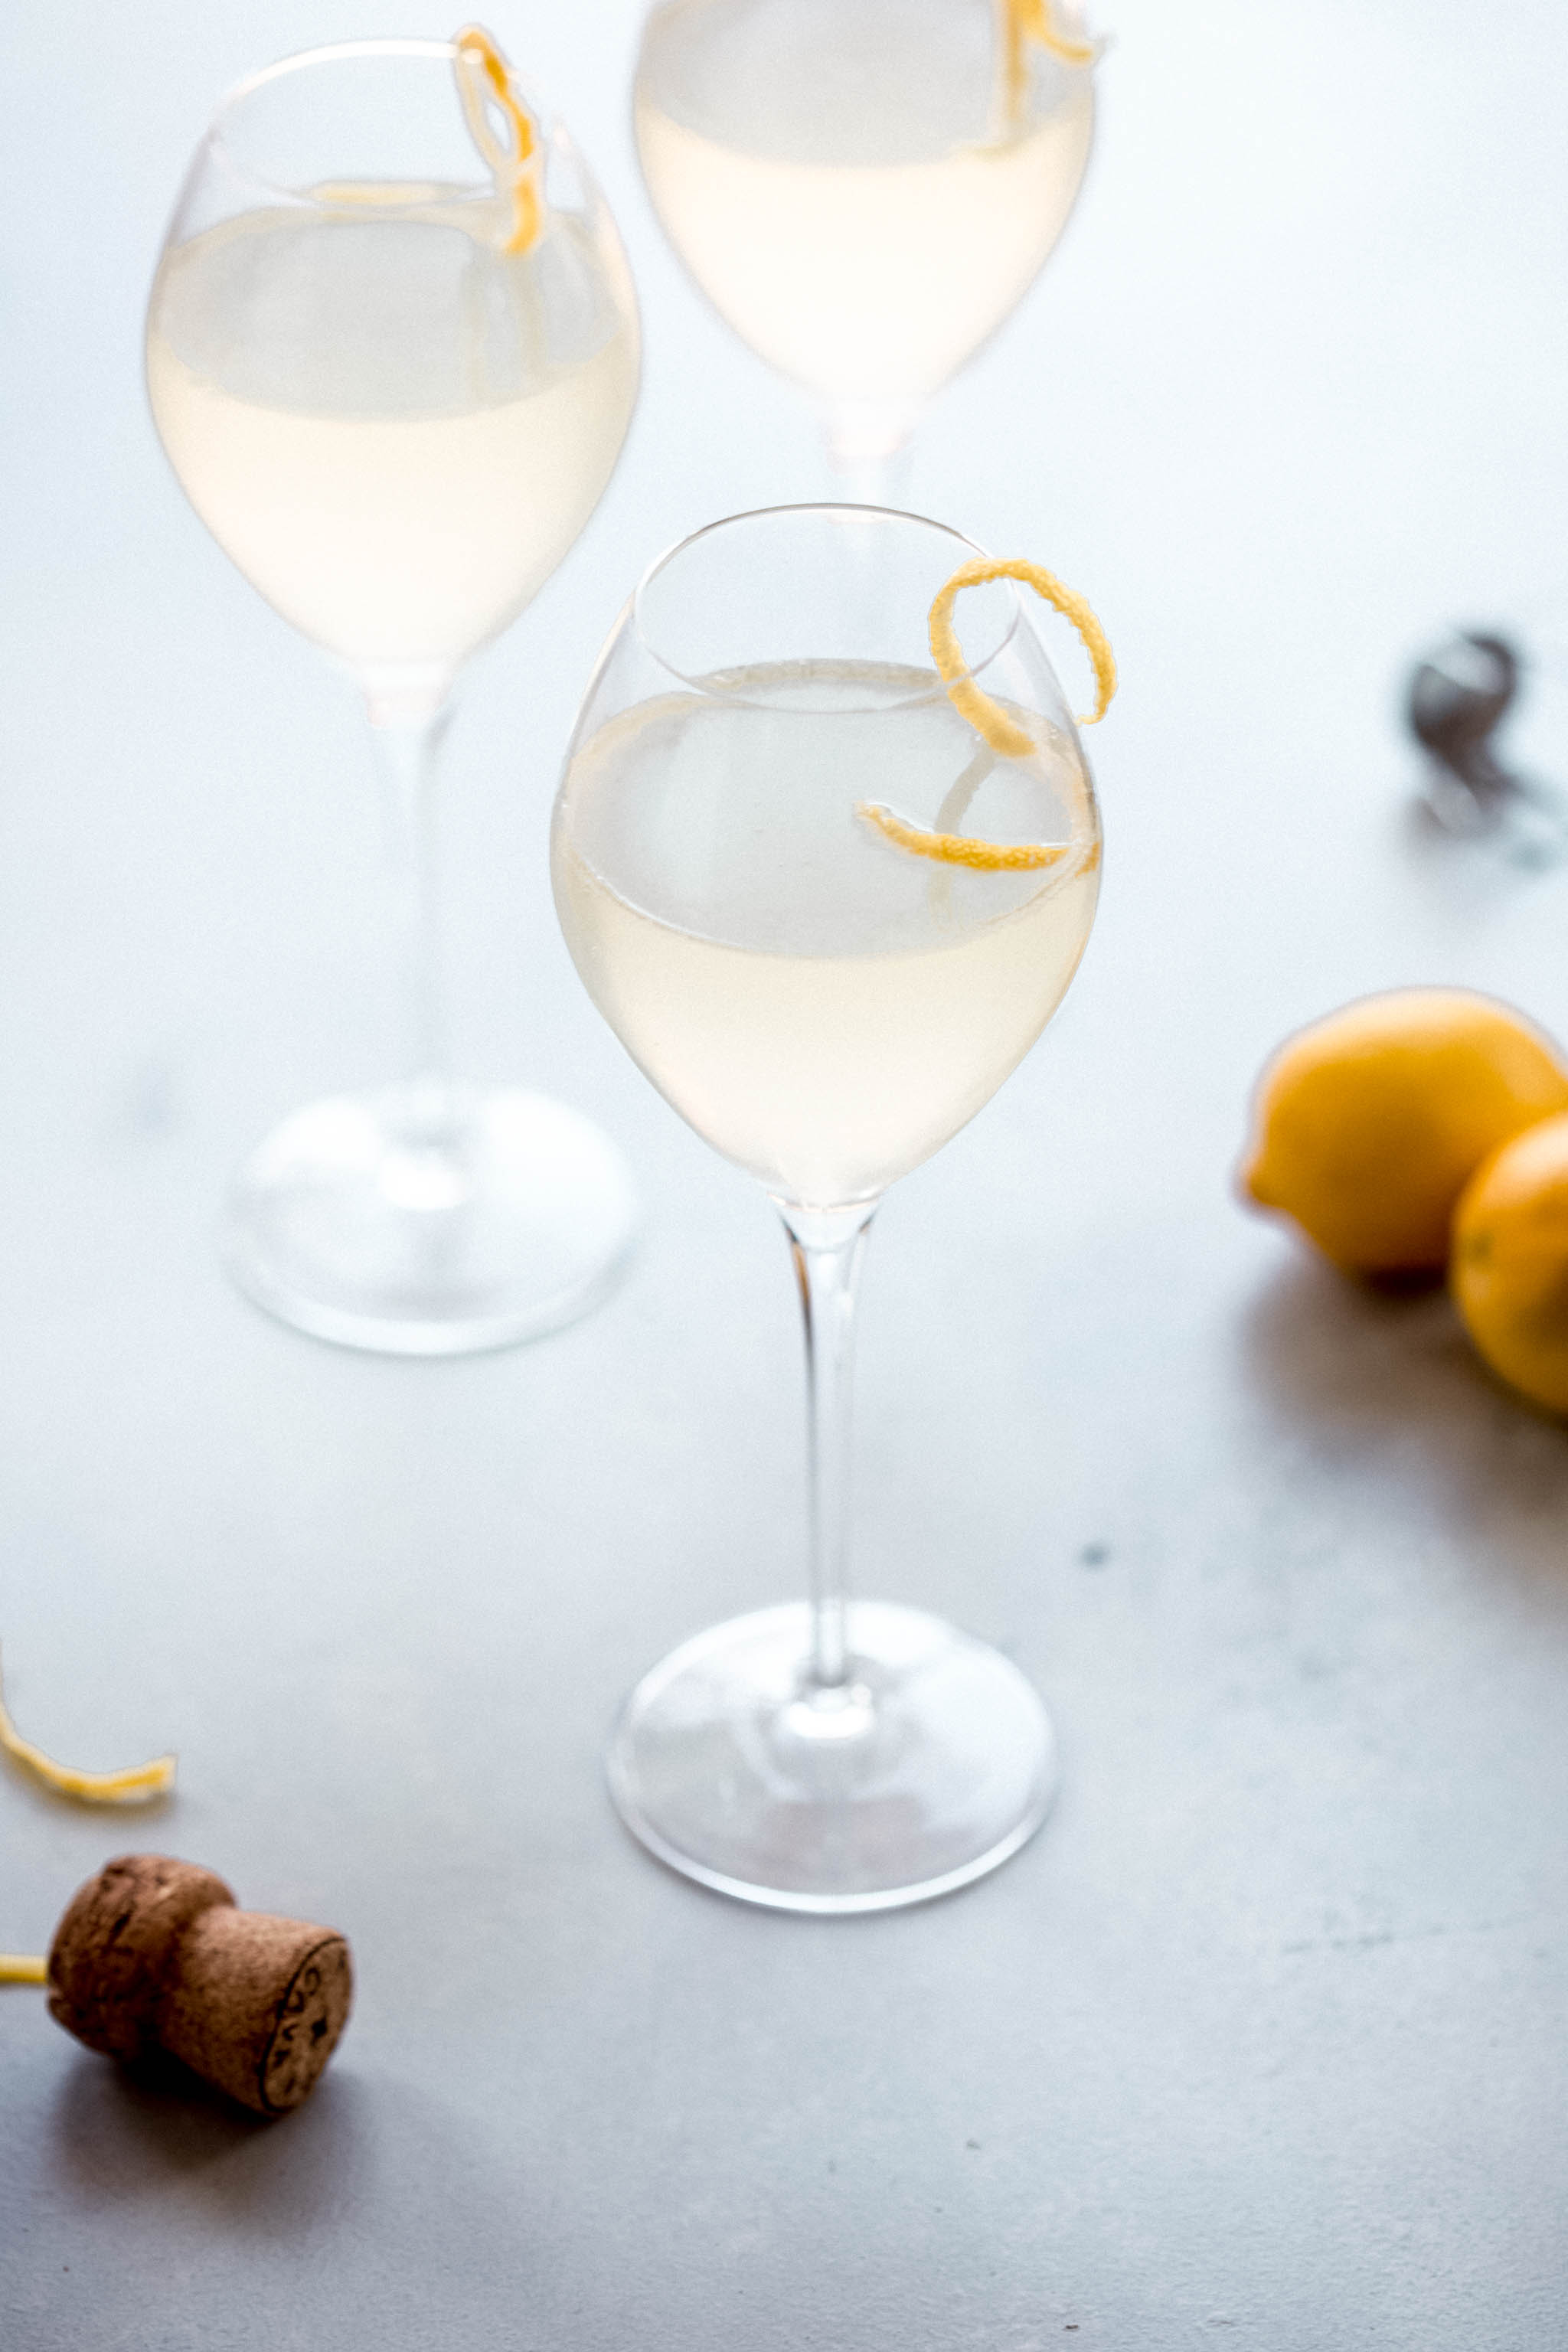 Side view of French 75 cocktail garnished with lemon twist.